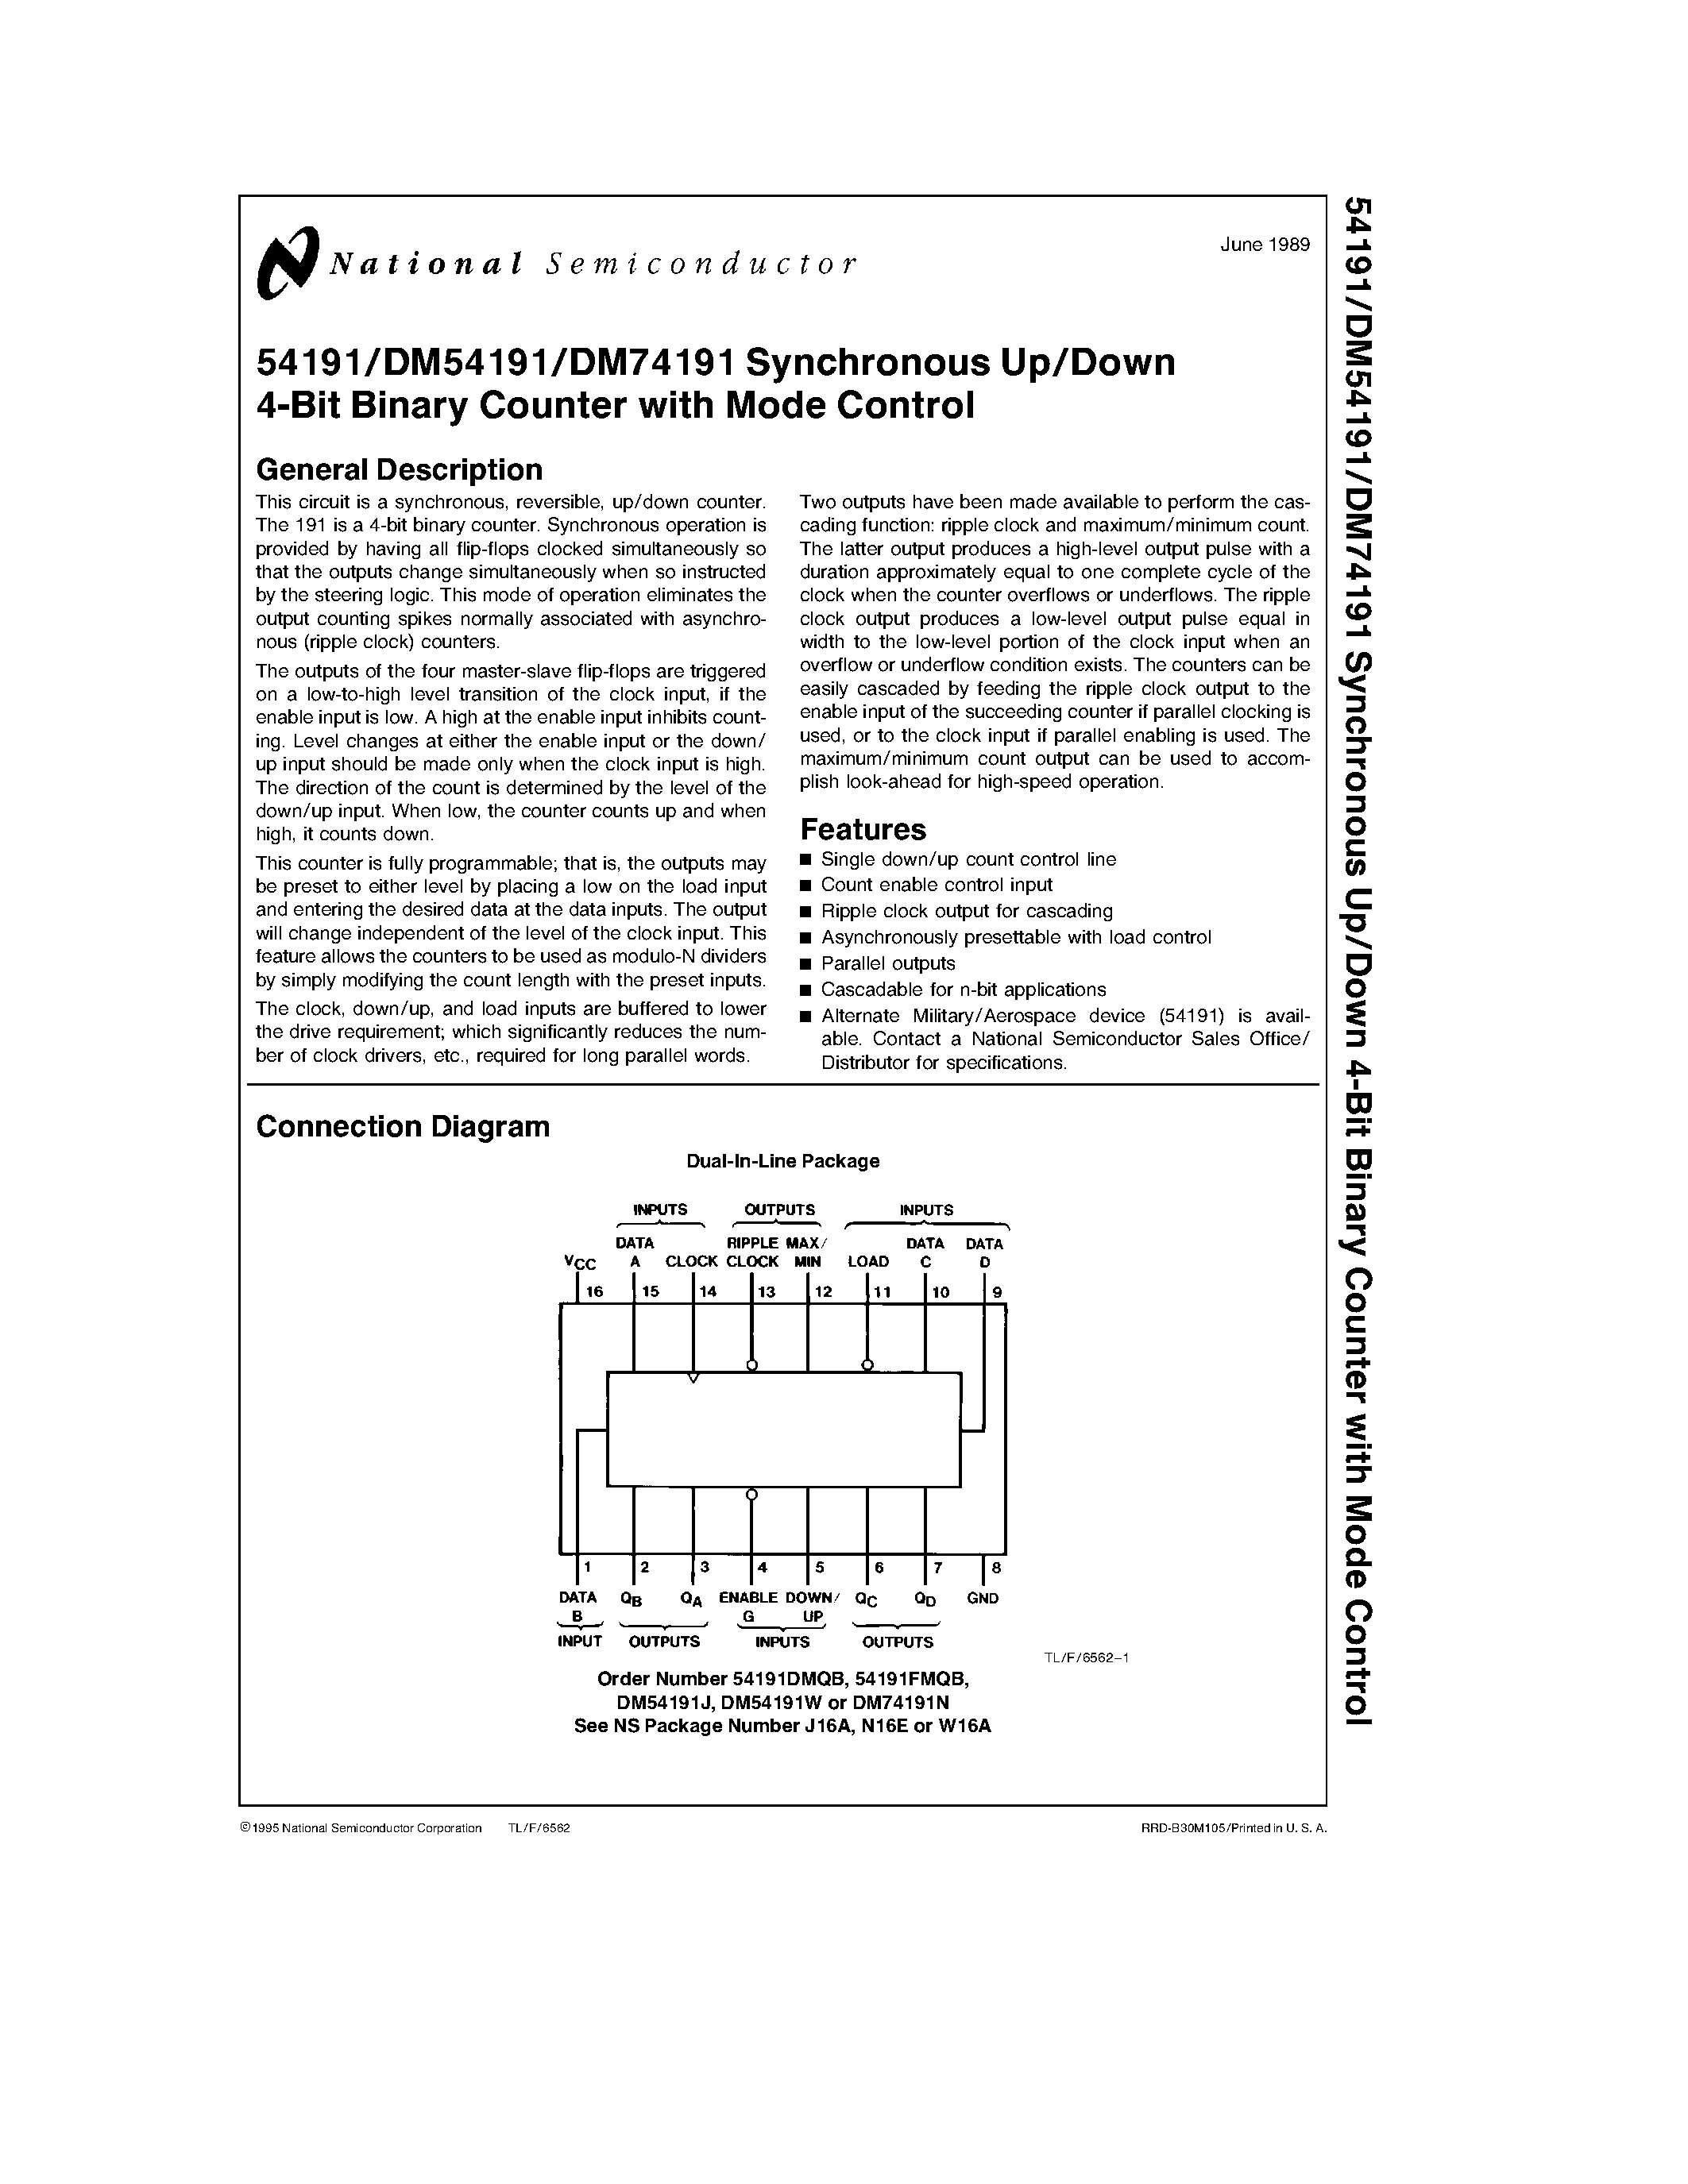 Datasheet 54191 - Synchronous Up/Down 4-Bit Binary Counter with Mode Control page 1